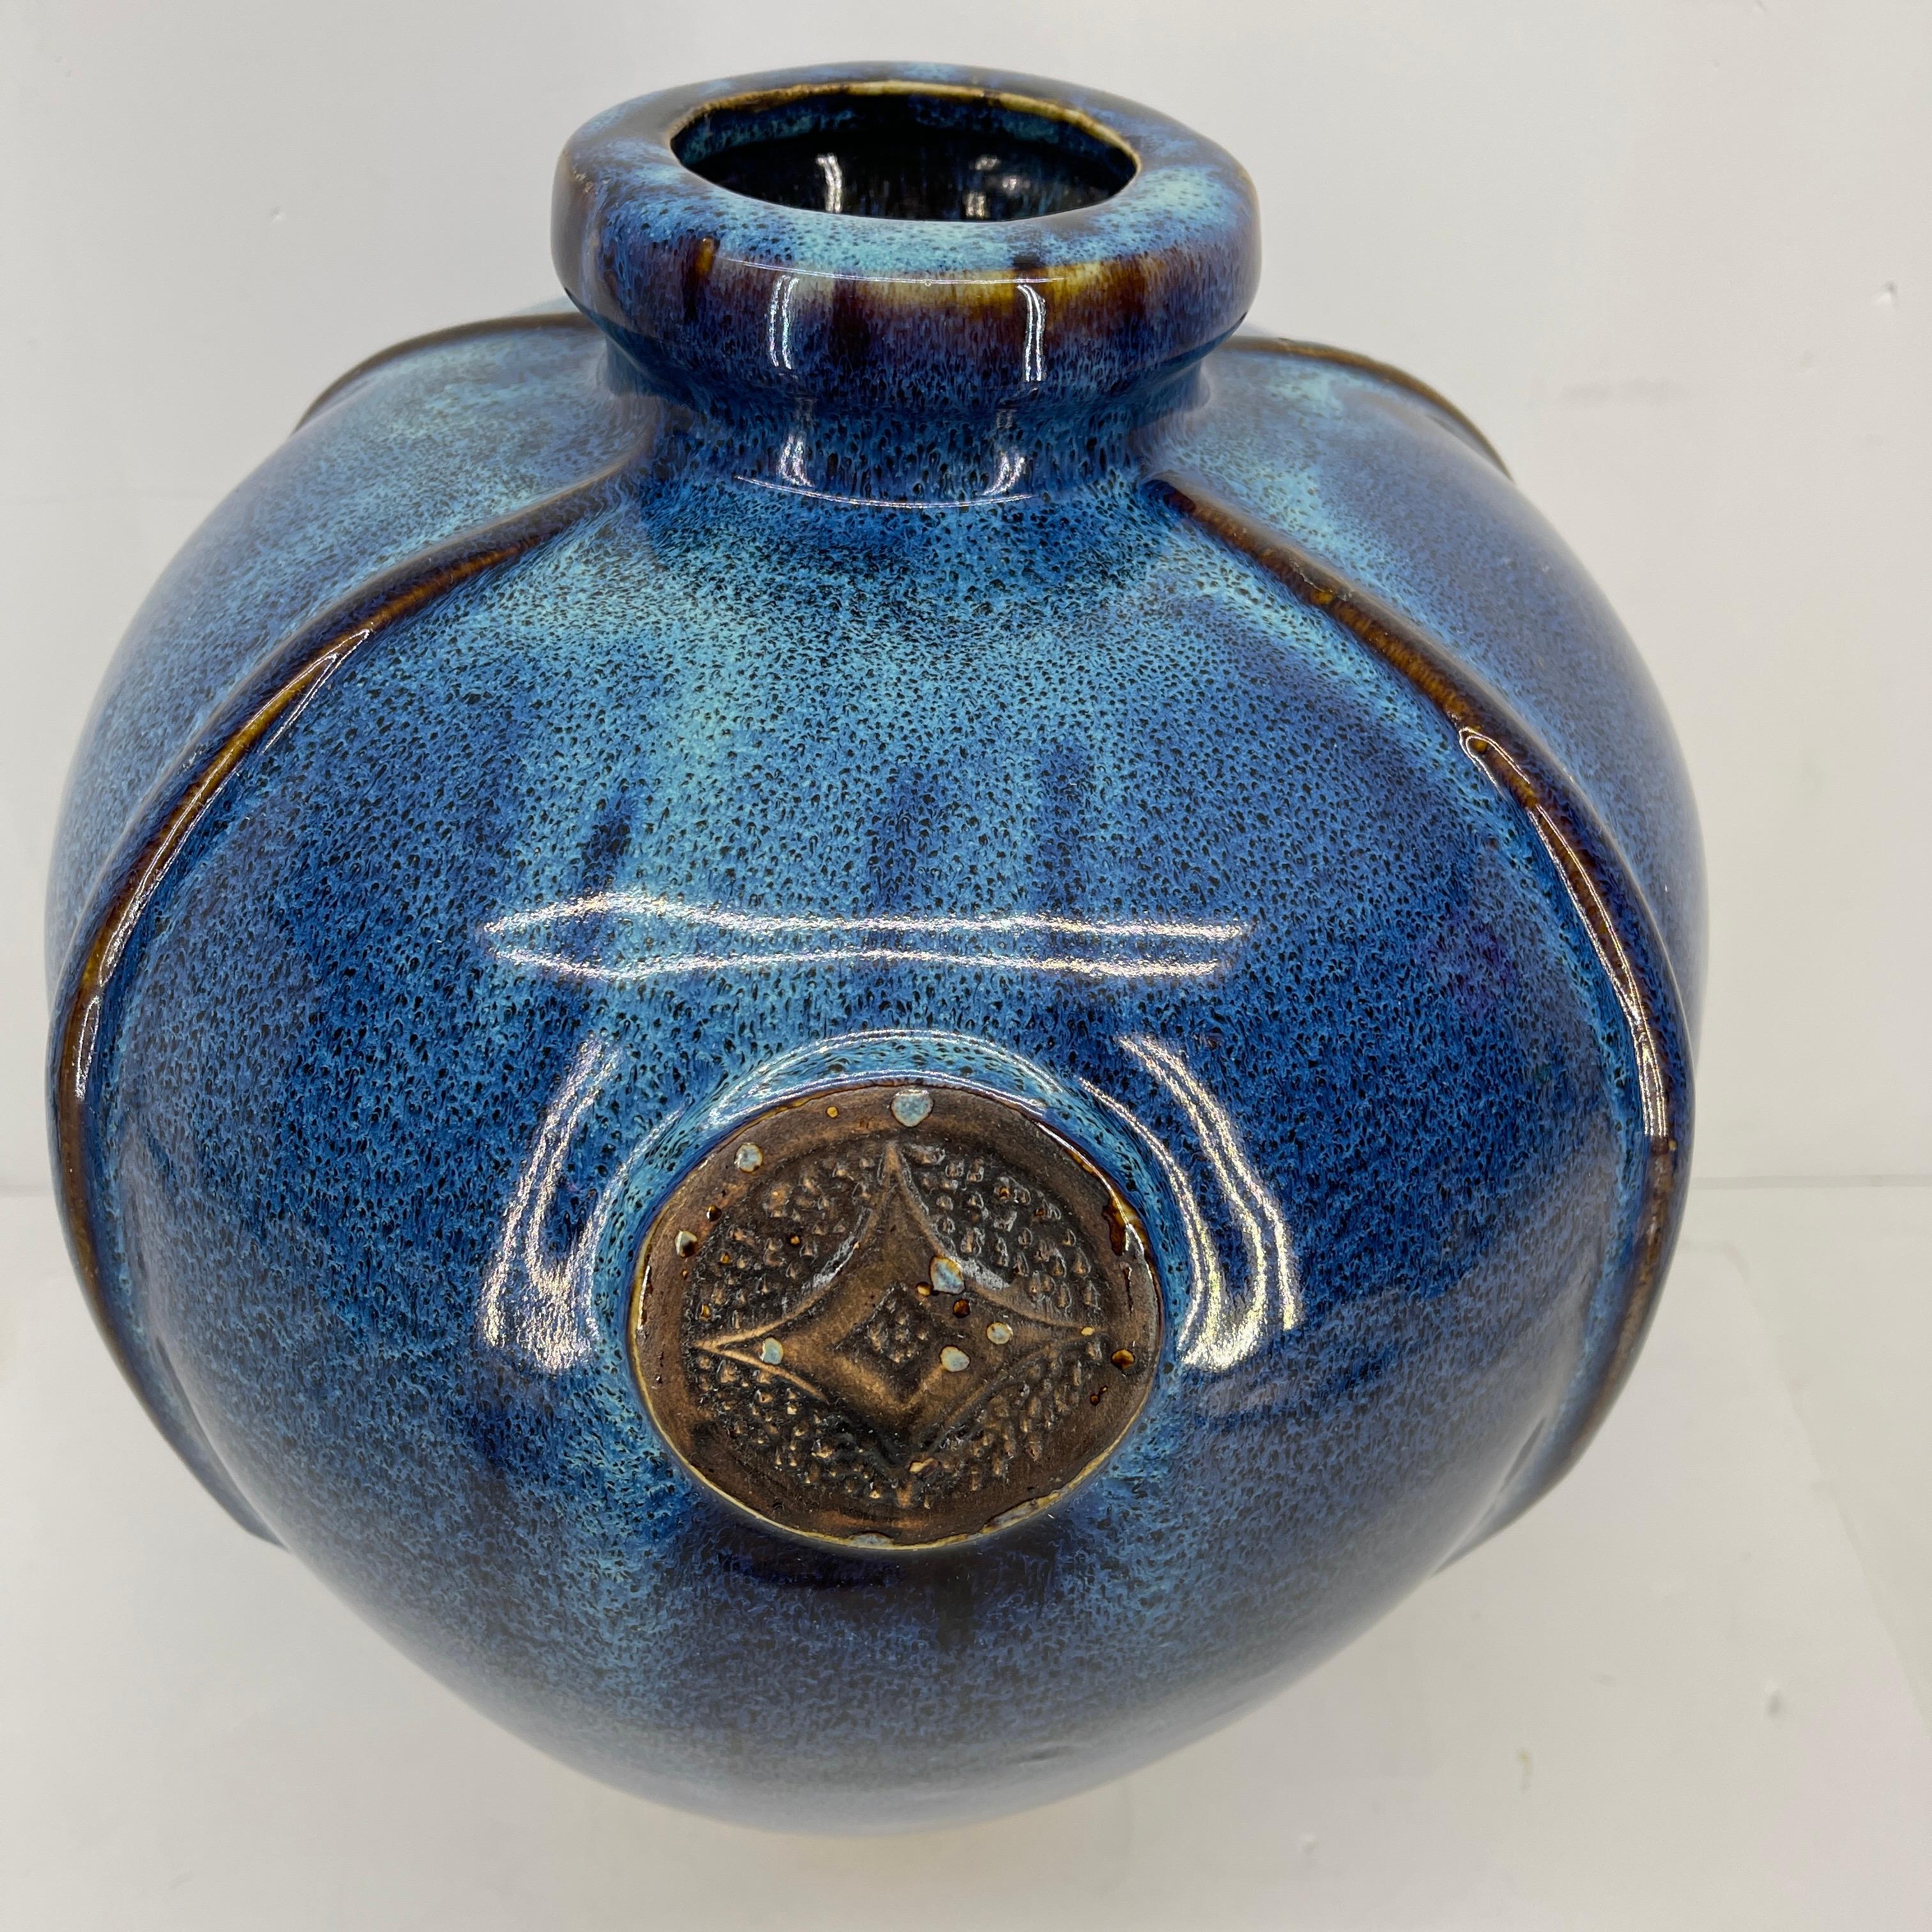 Large blue glazed ceramic vase, Mid-Century Modern.
This large hand crafted ceramic vase is an example of outstanding pottery work. The glazed is highly polished with shades of blue and teal. There is a large emblem of an elongated diamond pattern